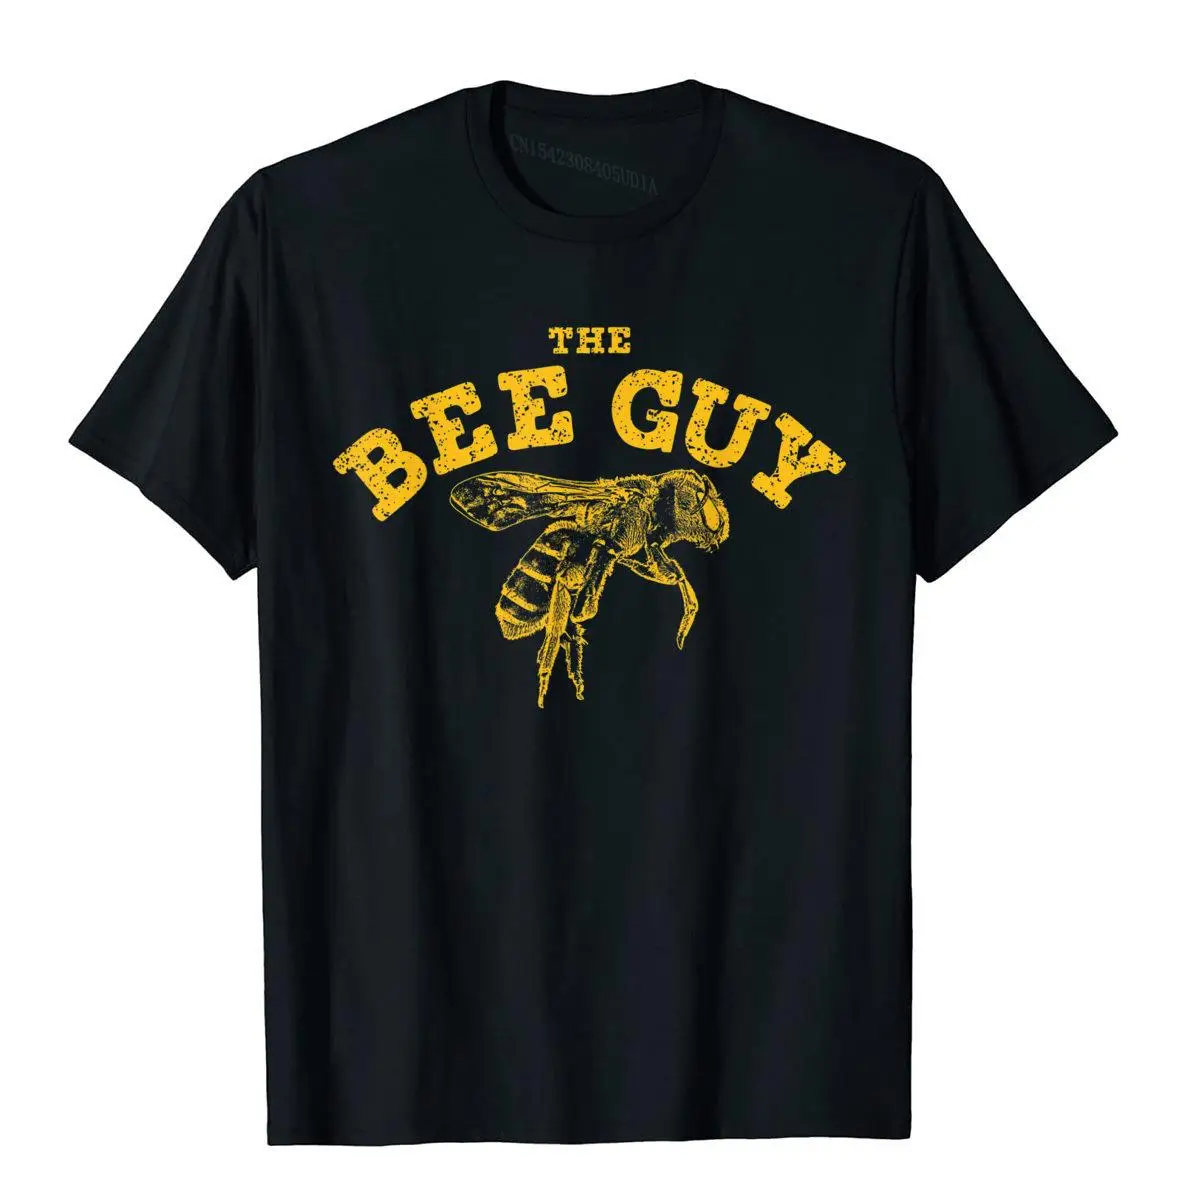 

The Bee Guy Funny Bees Lover Beekeeping Honey T-Shirt New Arrival Men's Tops T Shirt Hip Hop T Shirts Cotton Design